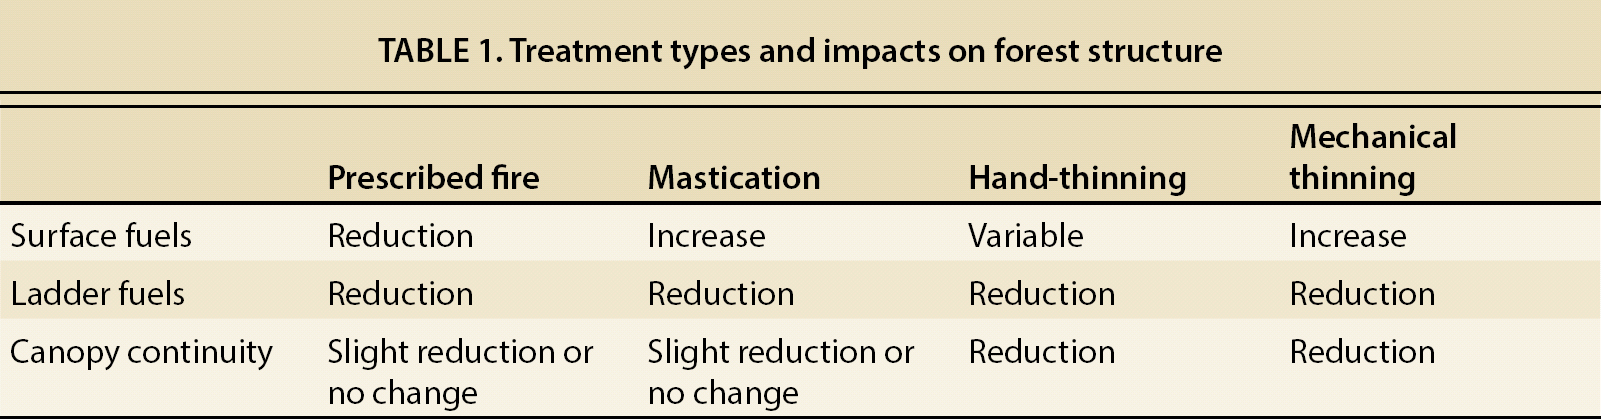 Treatment types and impacts on forest structure